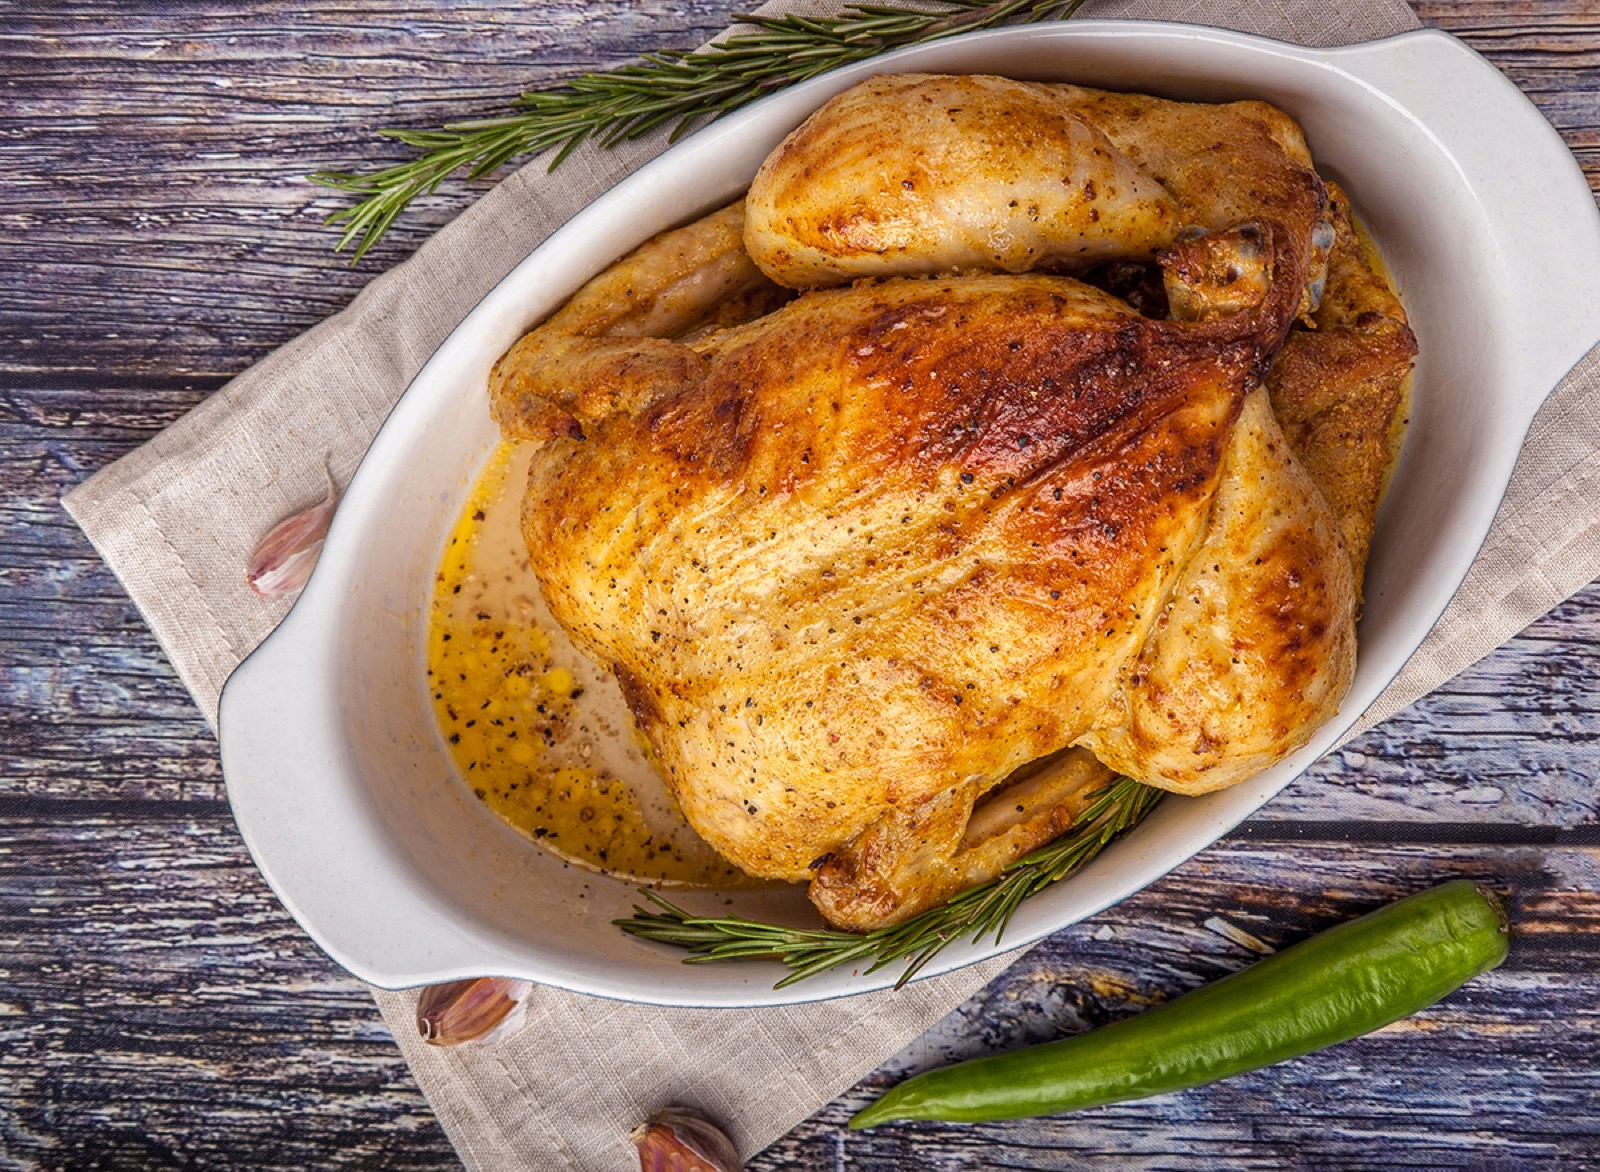 Does Your Real Age Match Your Taste Buds’ Age? Pick a Food for Each of These 16 Ingredients to Find Out Roast Chicken